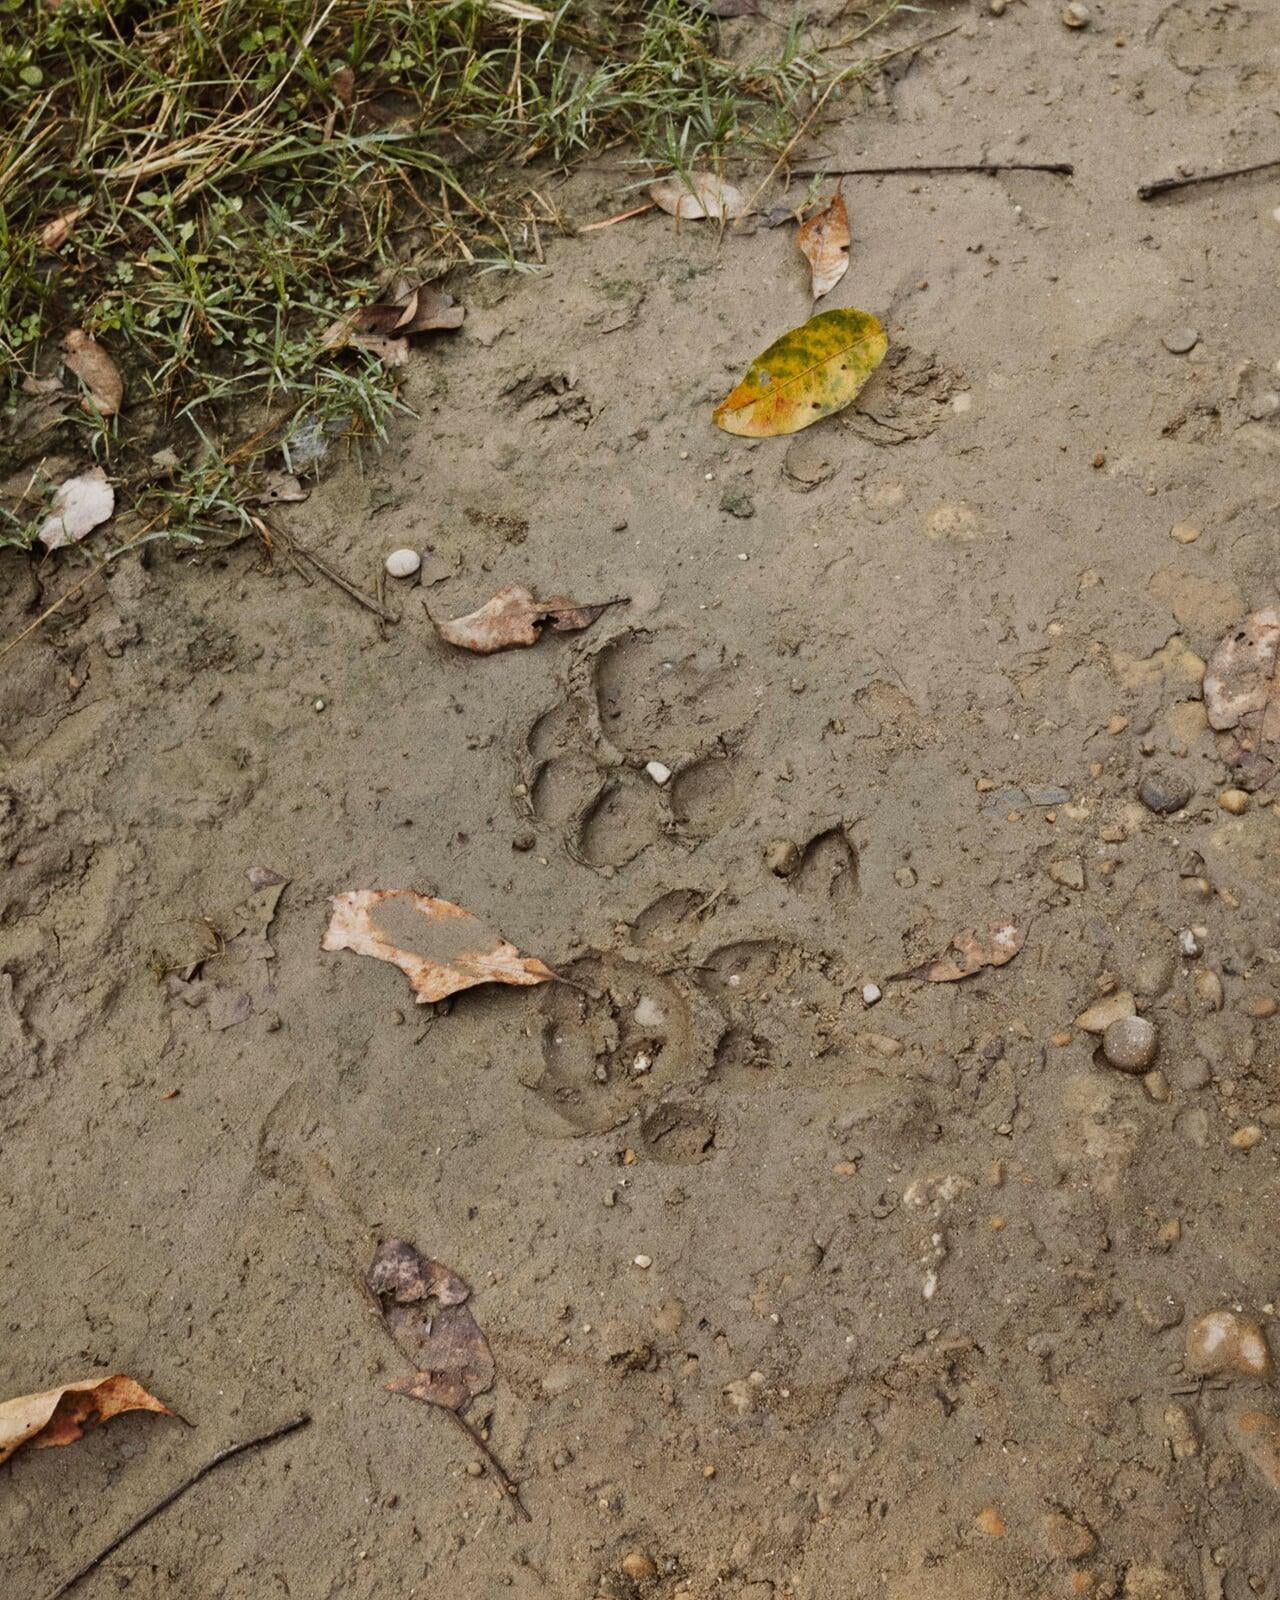 Tiger pug marks on path in Chitwan National Park Buffer Zone.